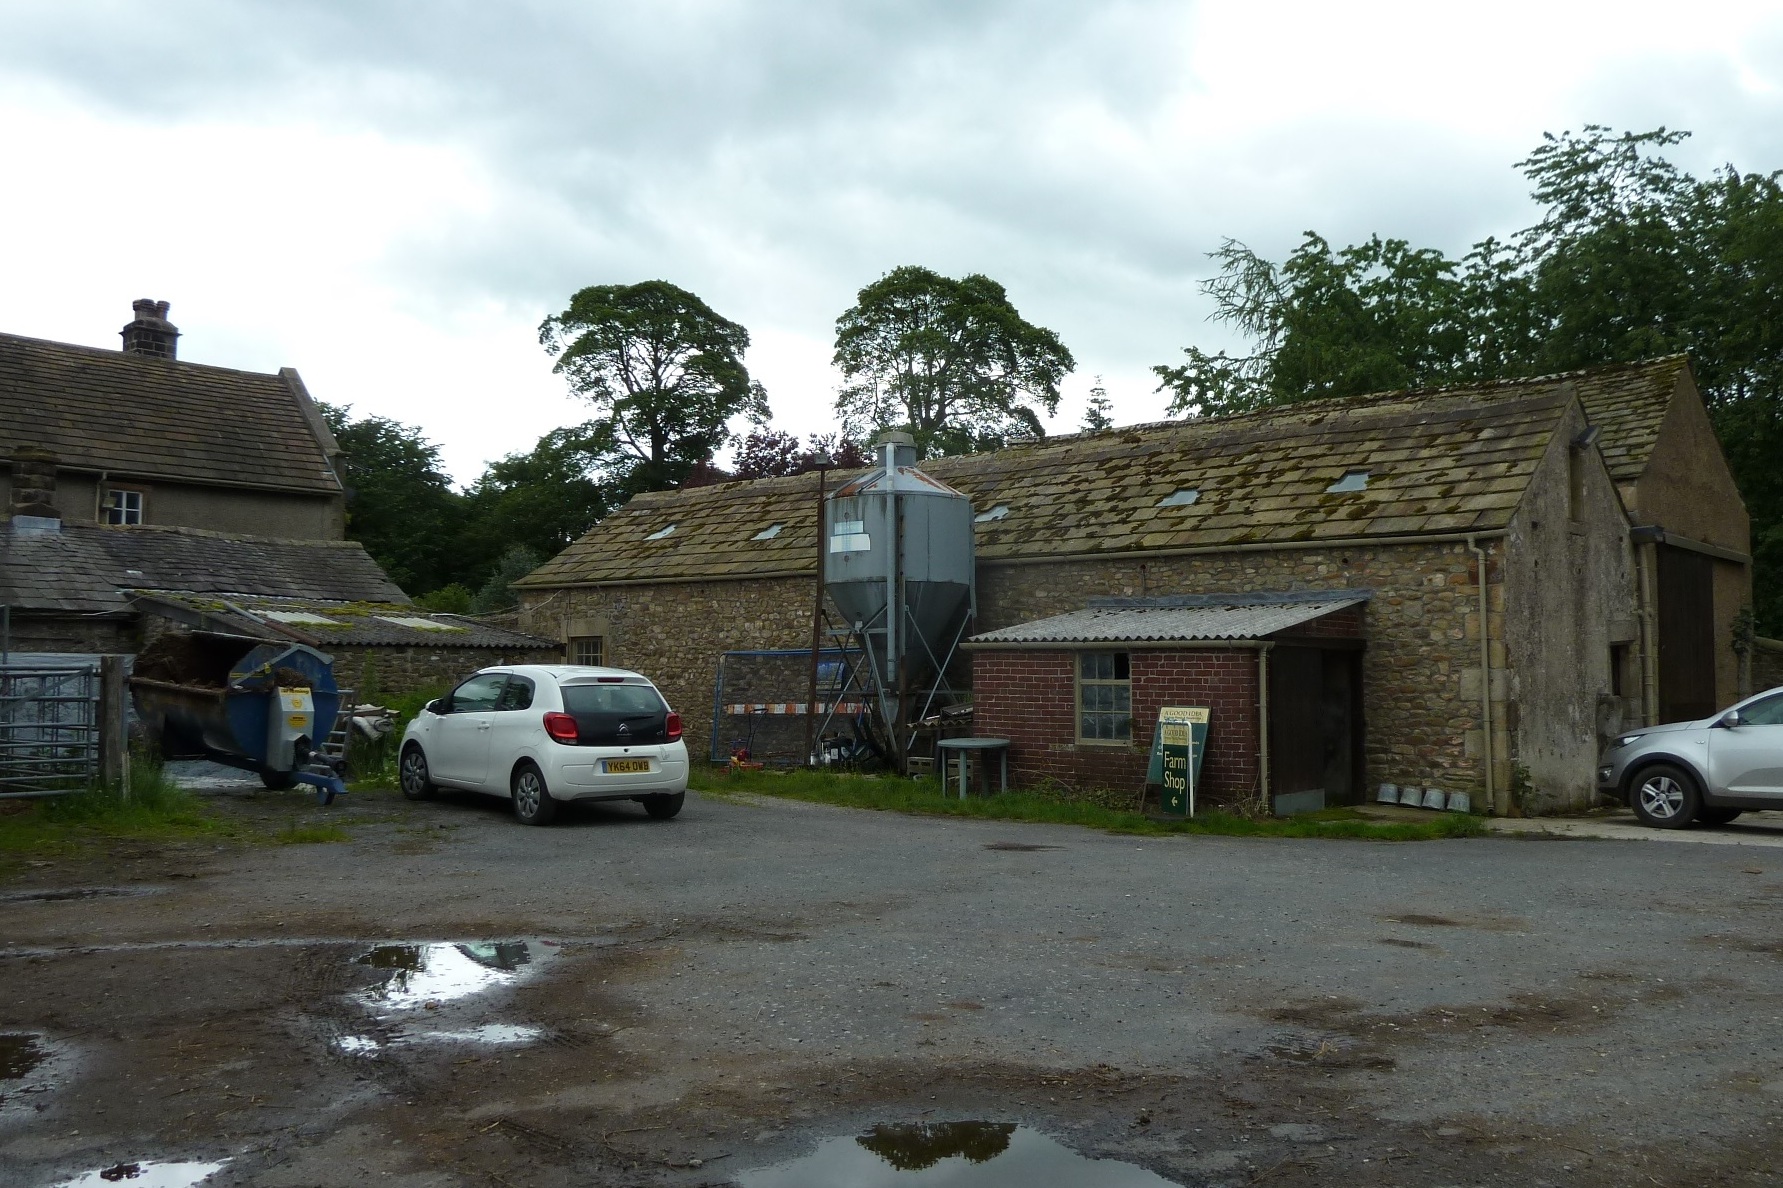 Farming family win 'David and Goliath' fight over plans to re-develop their Dales home